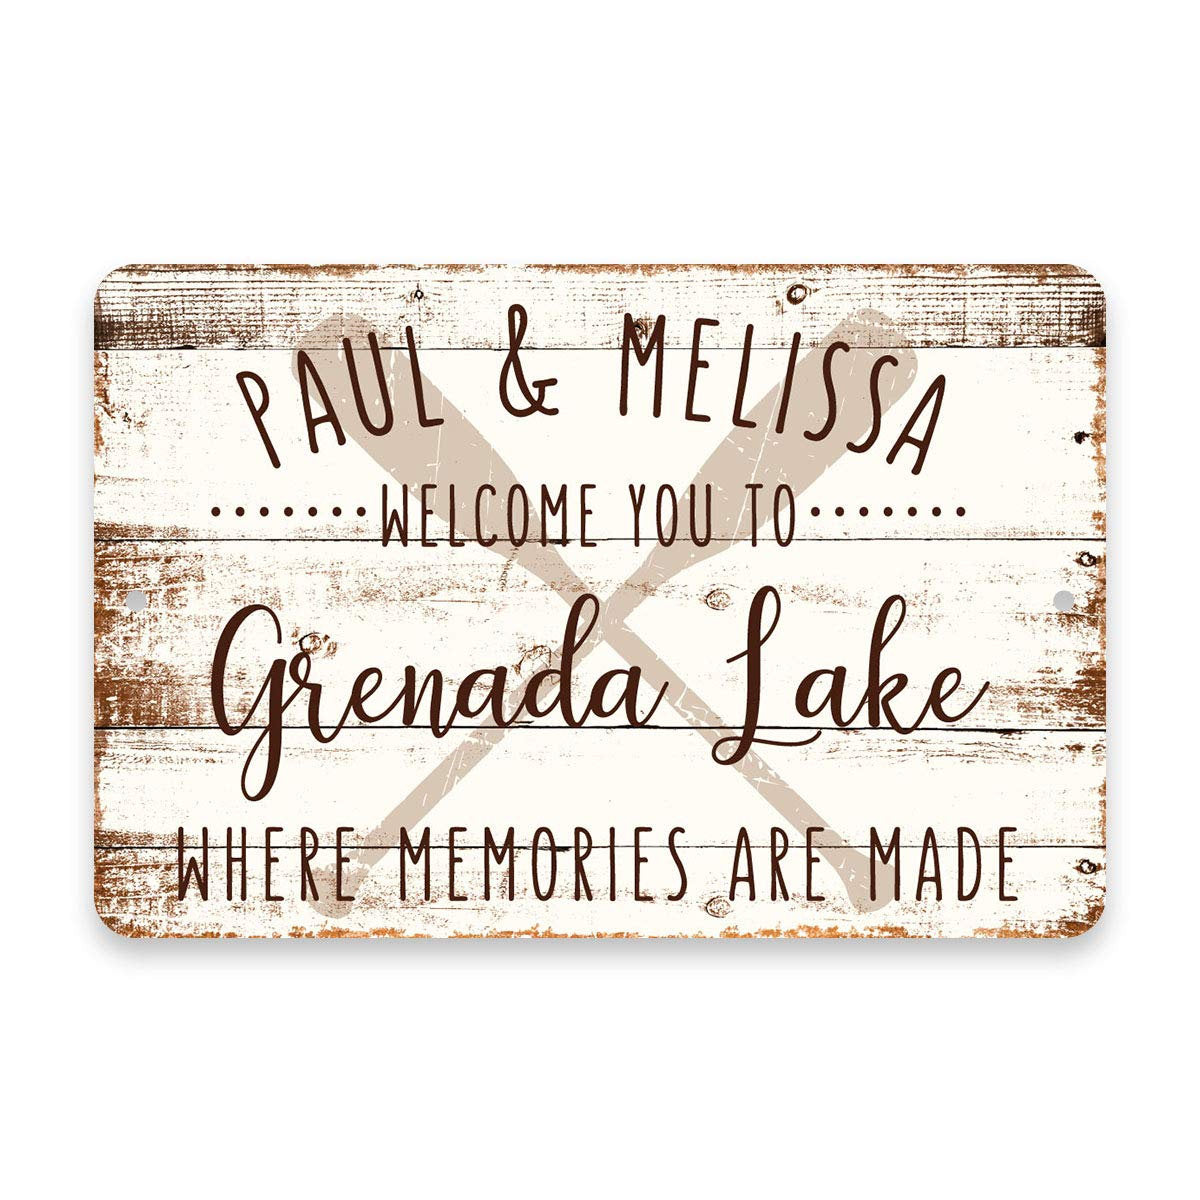 Personalized Welcome to Grenada Lake Where Memories are Made Sign - 8 X 12 Metal Sign with Wood Look